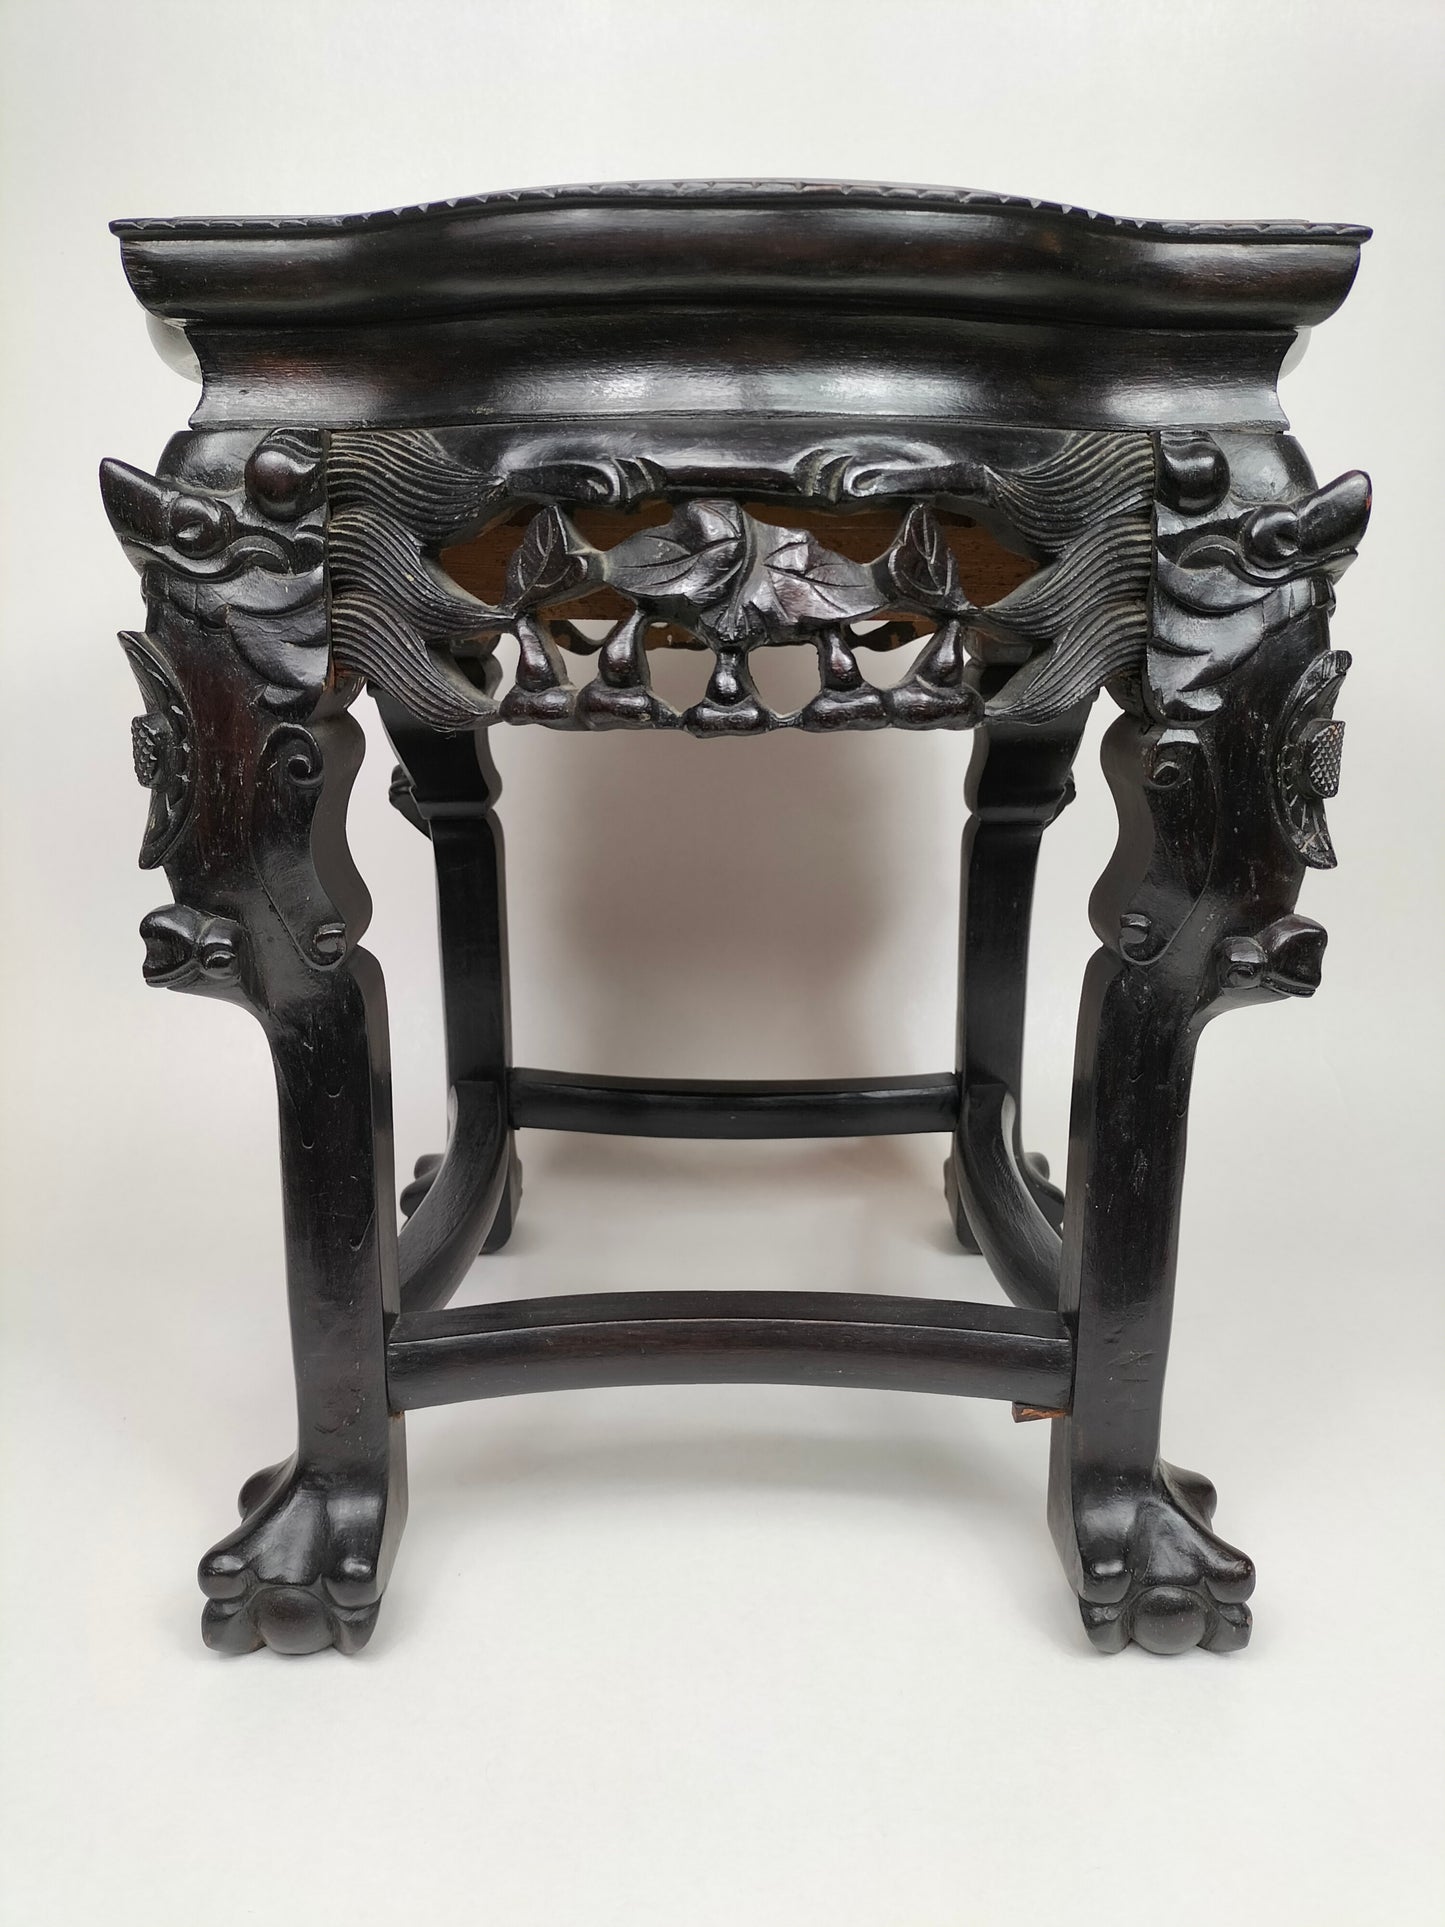 Antique Chinese side table inlaid wih a marble top // Early 20th century